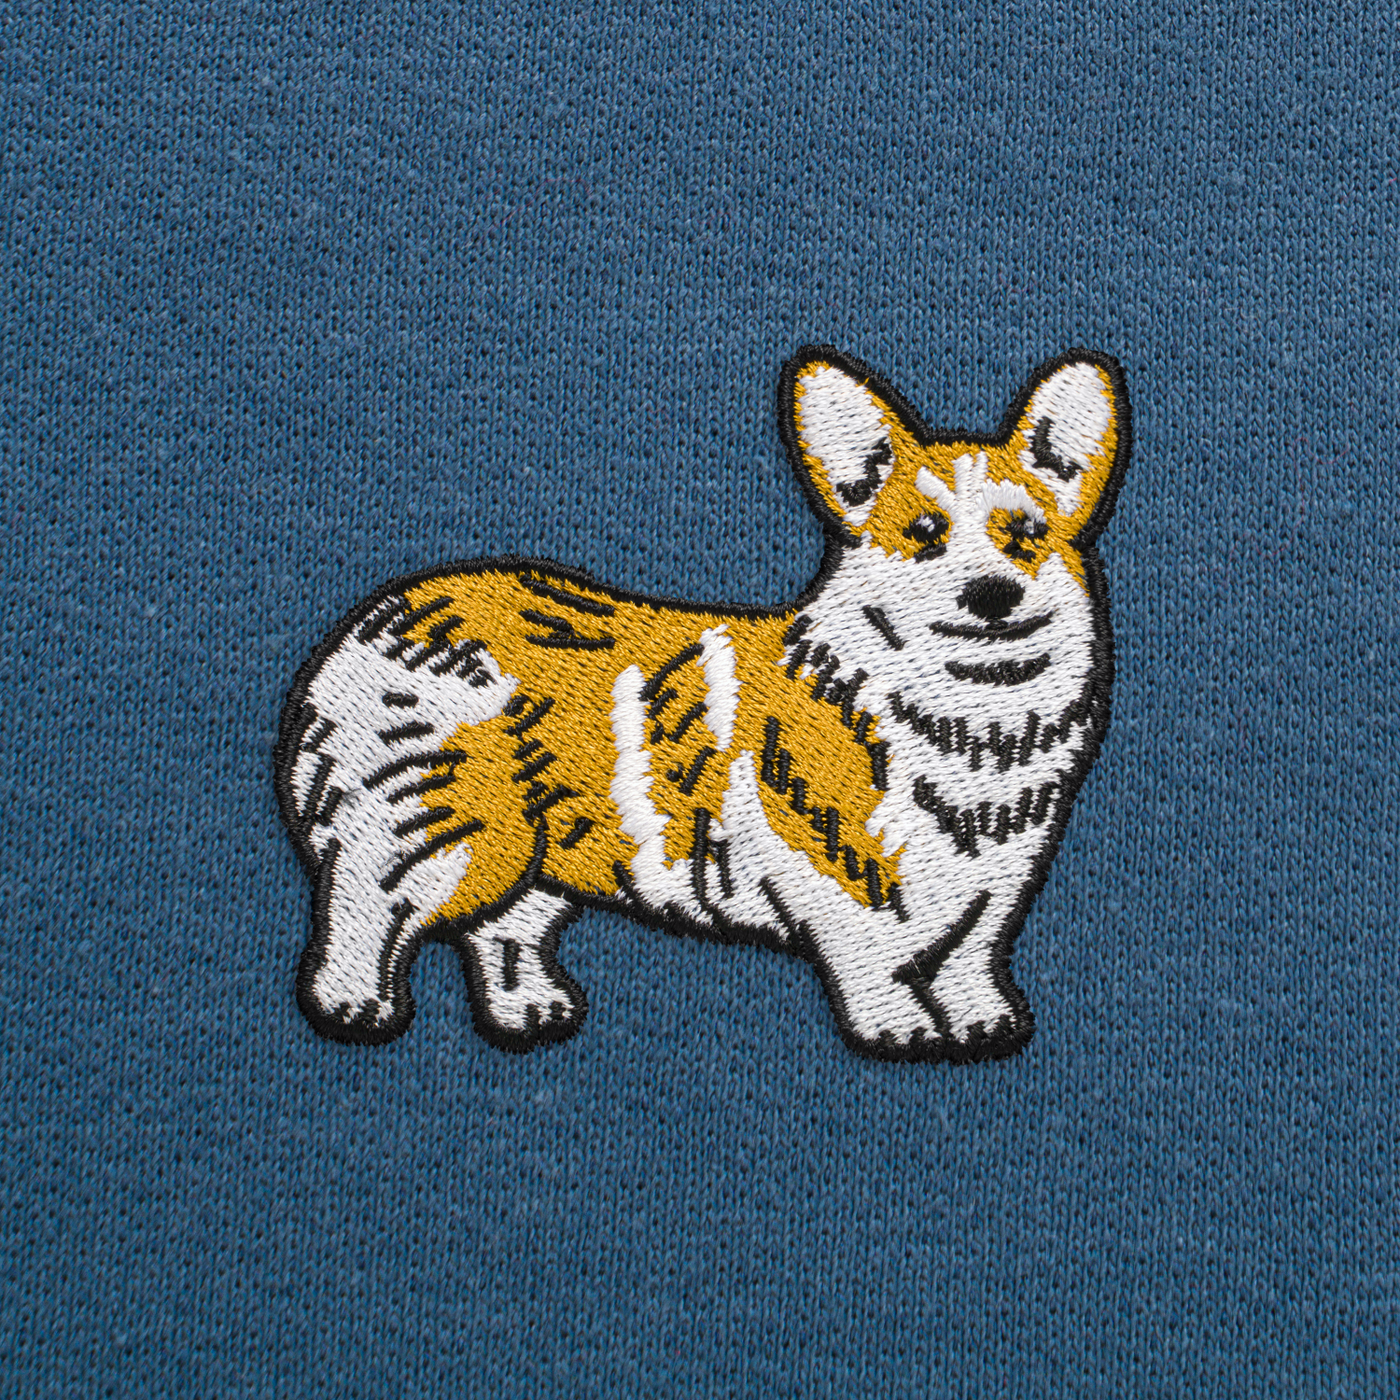 Bobby's Planet Men's Embroidered Corgi Sweatshirt from Paws Dog Cat Animals Collection in Indigo Blue Color#color_indigo-blue